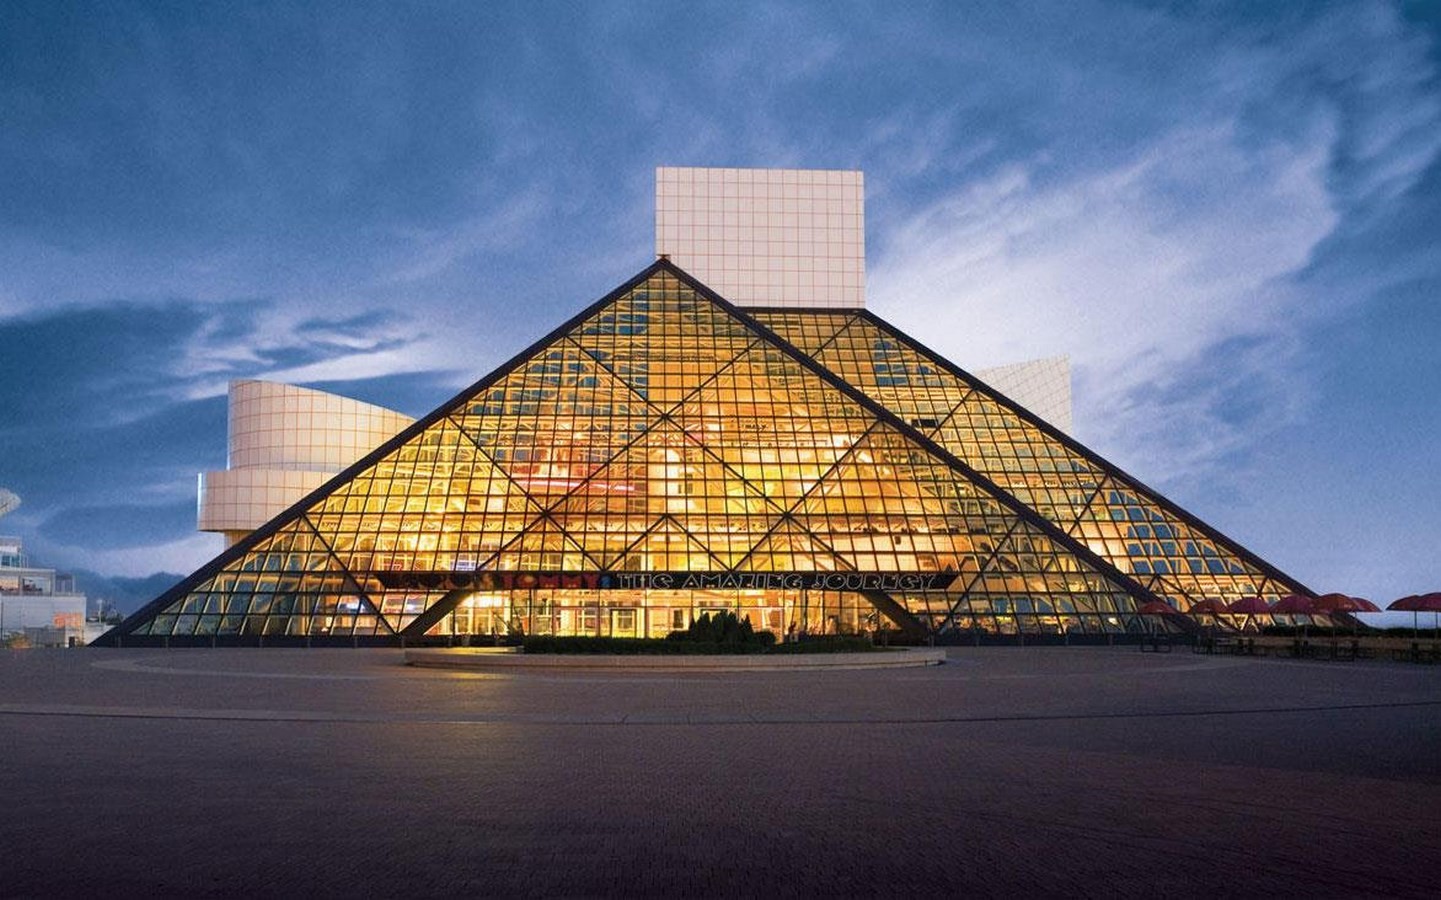 ROCK AND ROLL HALL OF FAME, CLEVELAND, OHIO - Sheet1